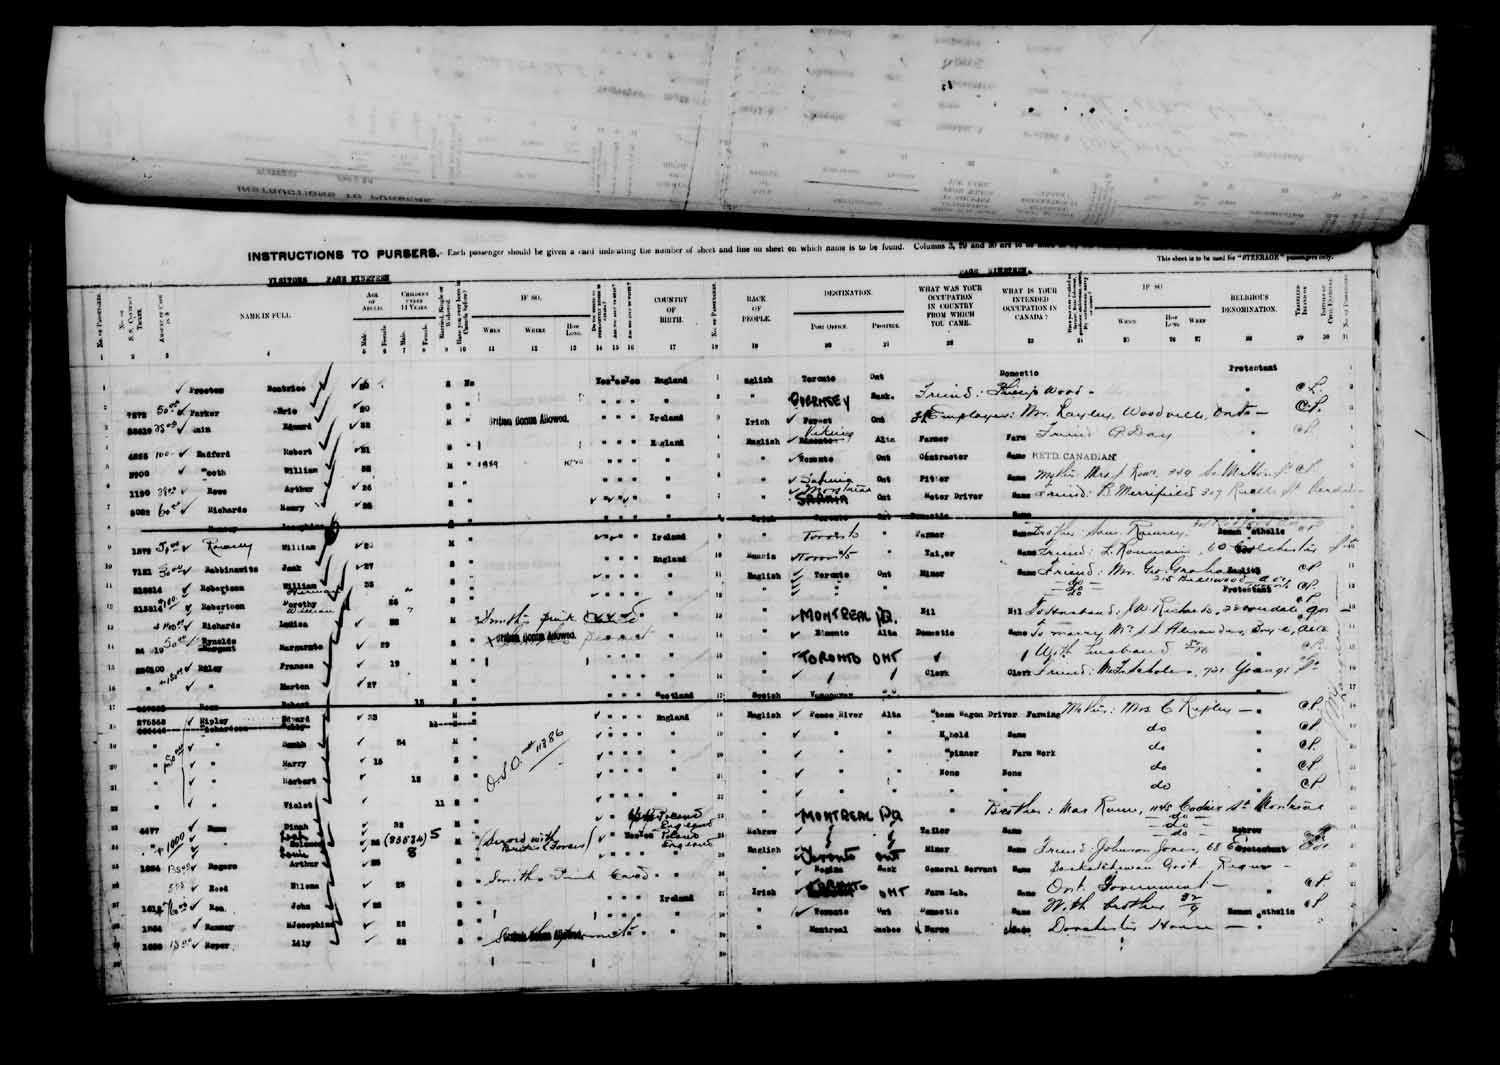 Digitized page of Passenger Lists for Image No.: e003610659